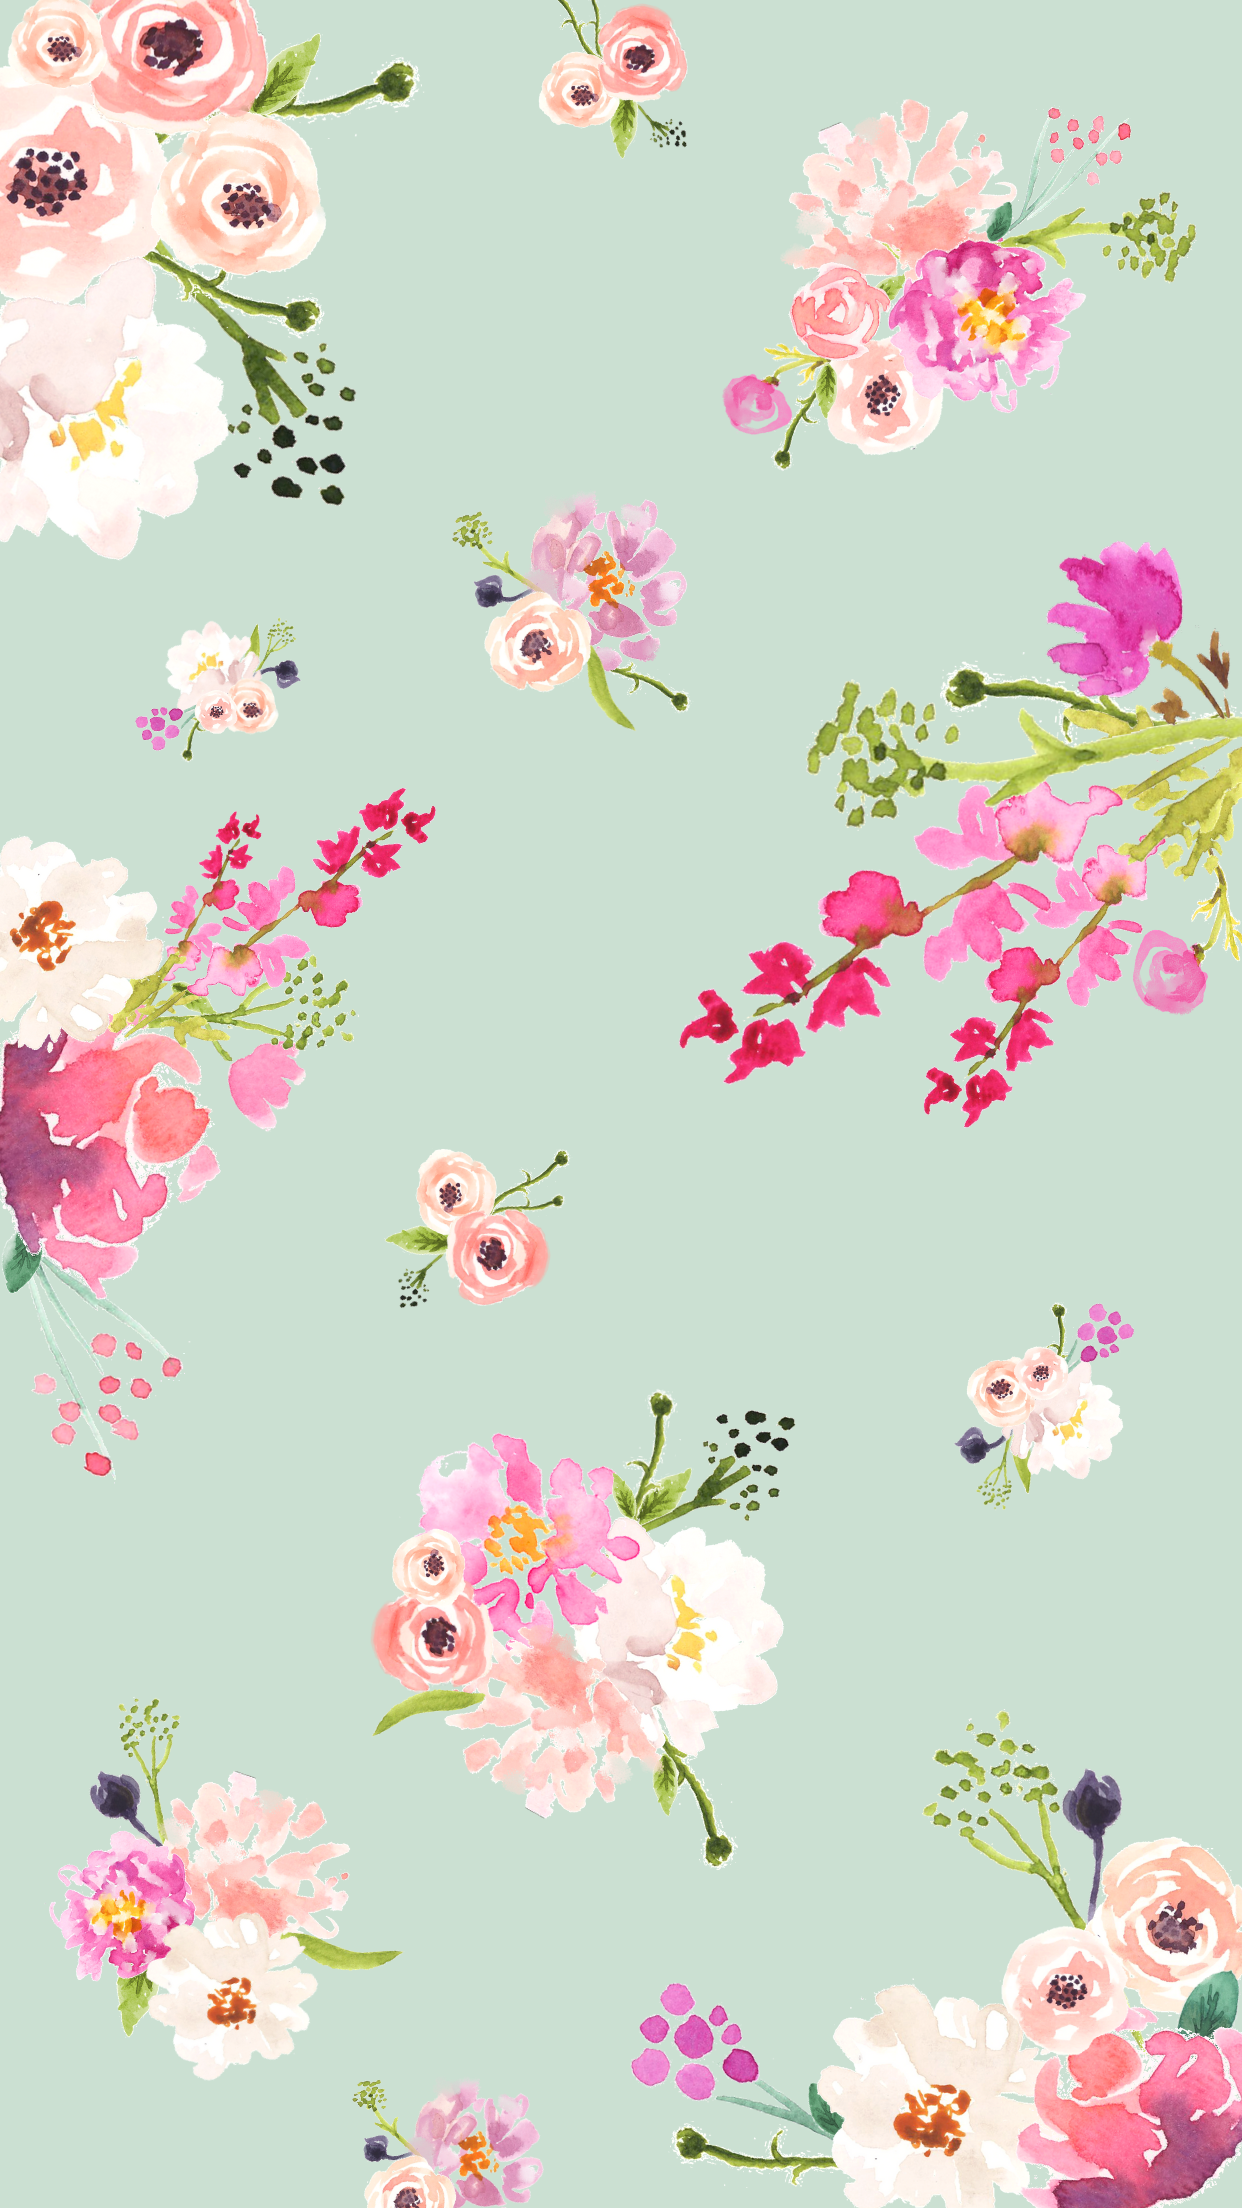 Spring Zoom Backgrounds and Phone Wallpapers